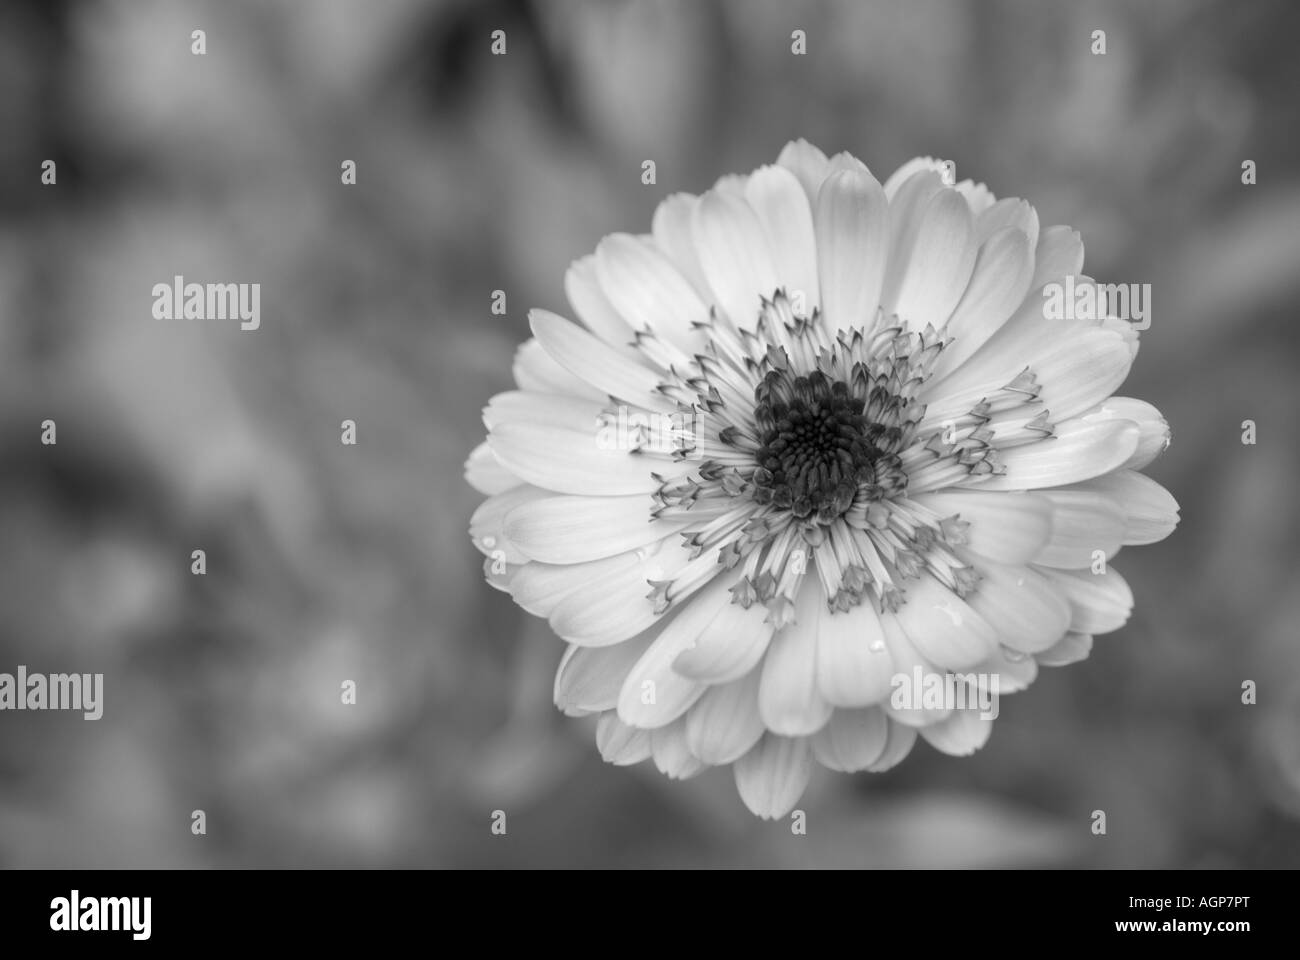 Marigold flower Black and White Stock Photos & Images - Alamy